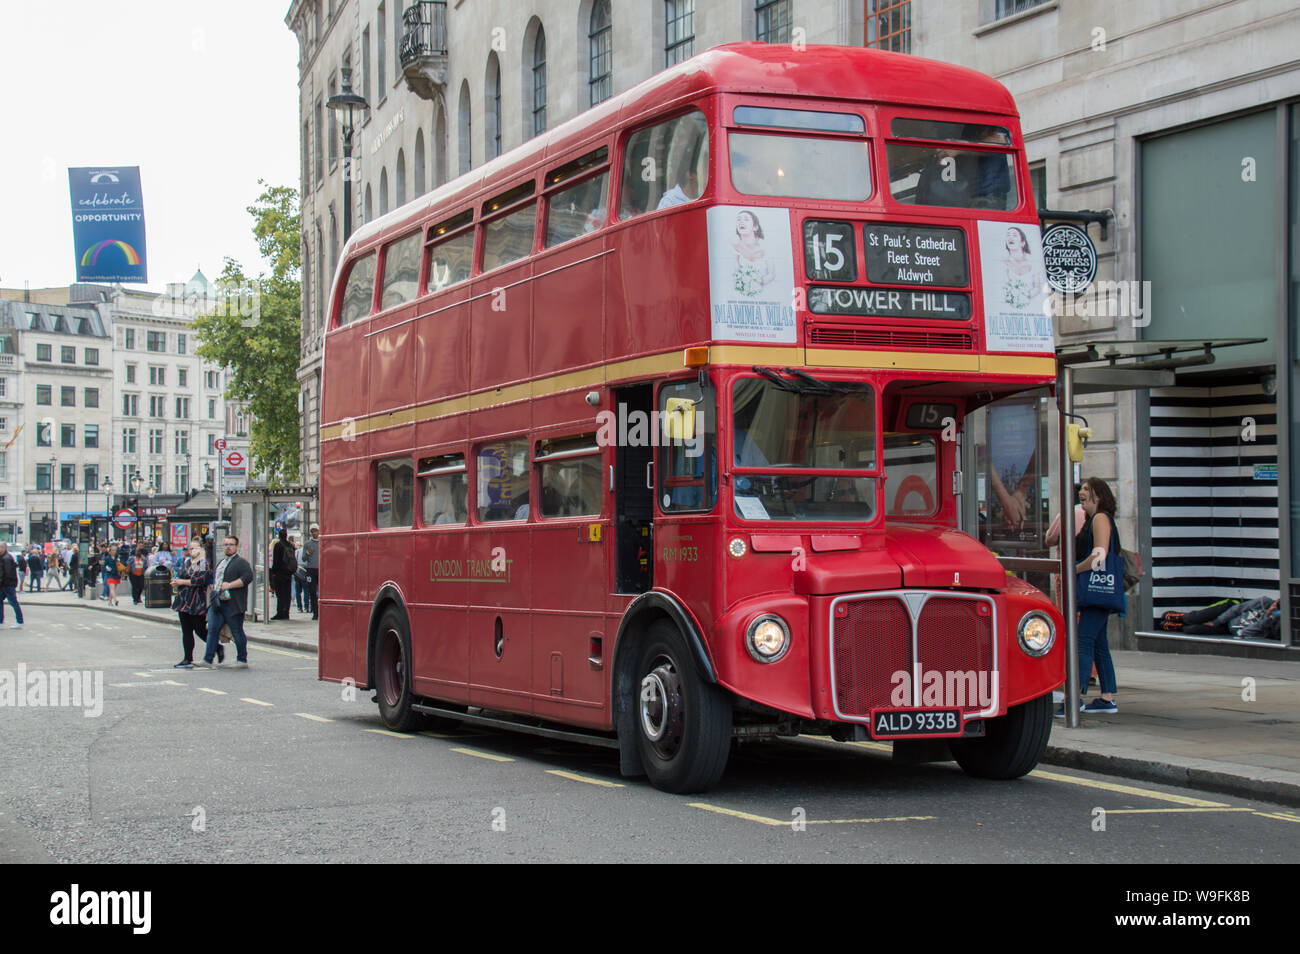 Old route master bus in route 15 in London Stock Photo